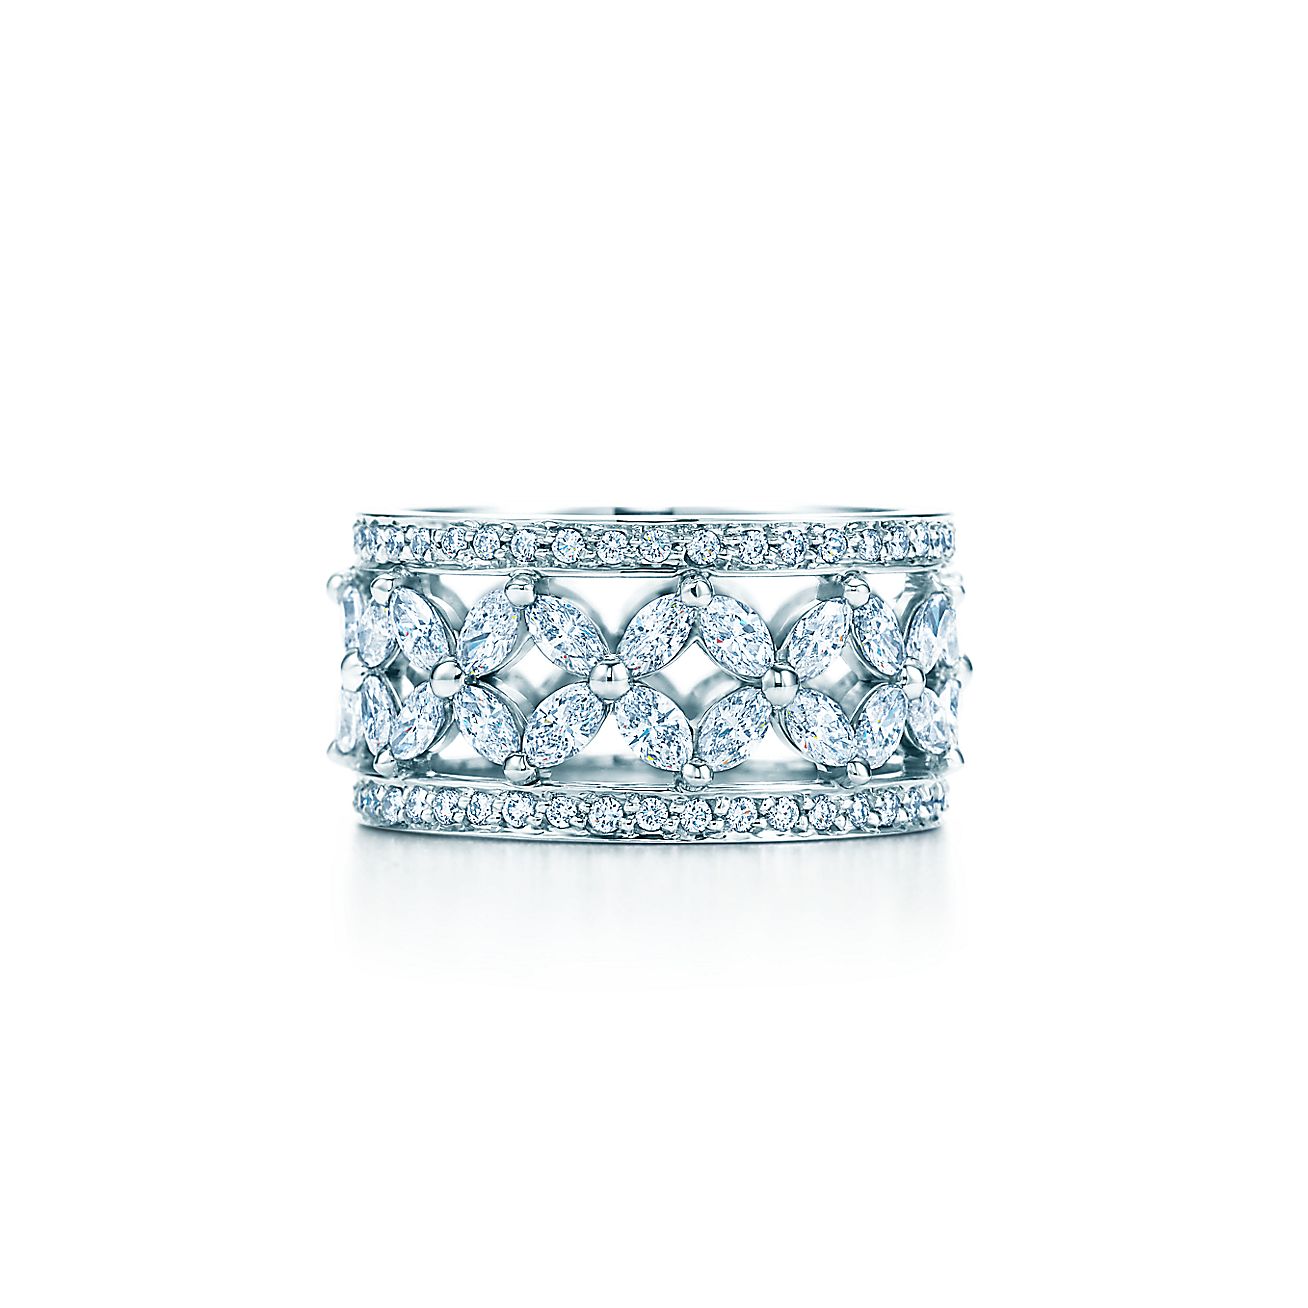 Tiffany Victoria® band ring in platinum with diamonds. Tiffany & Co.